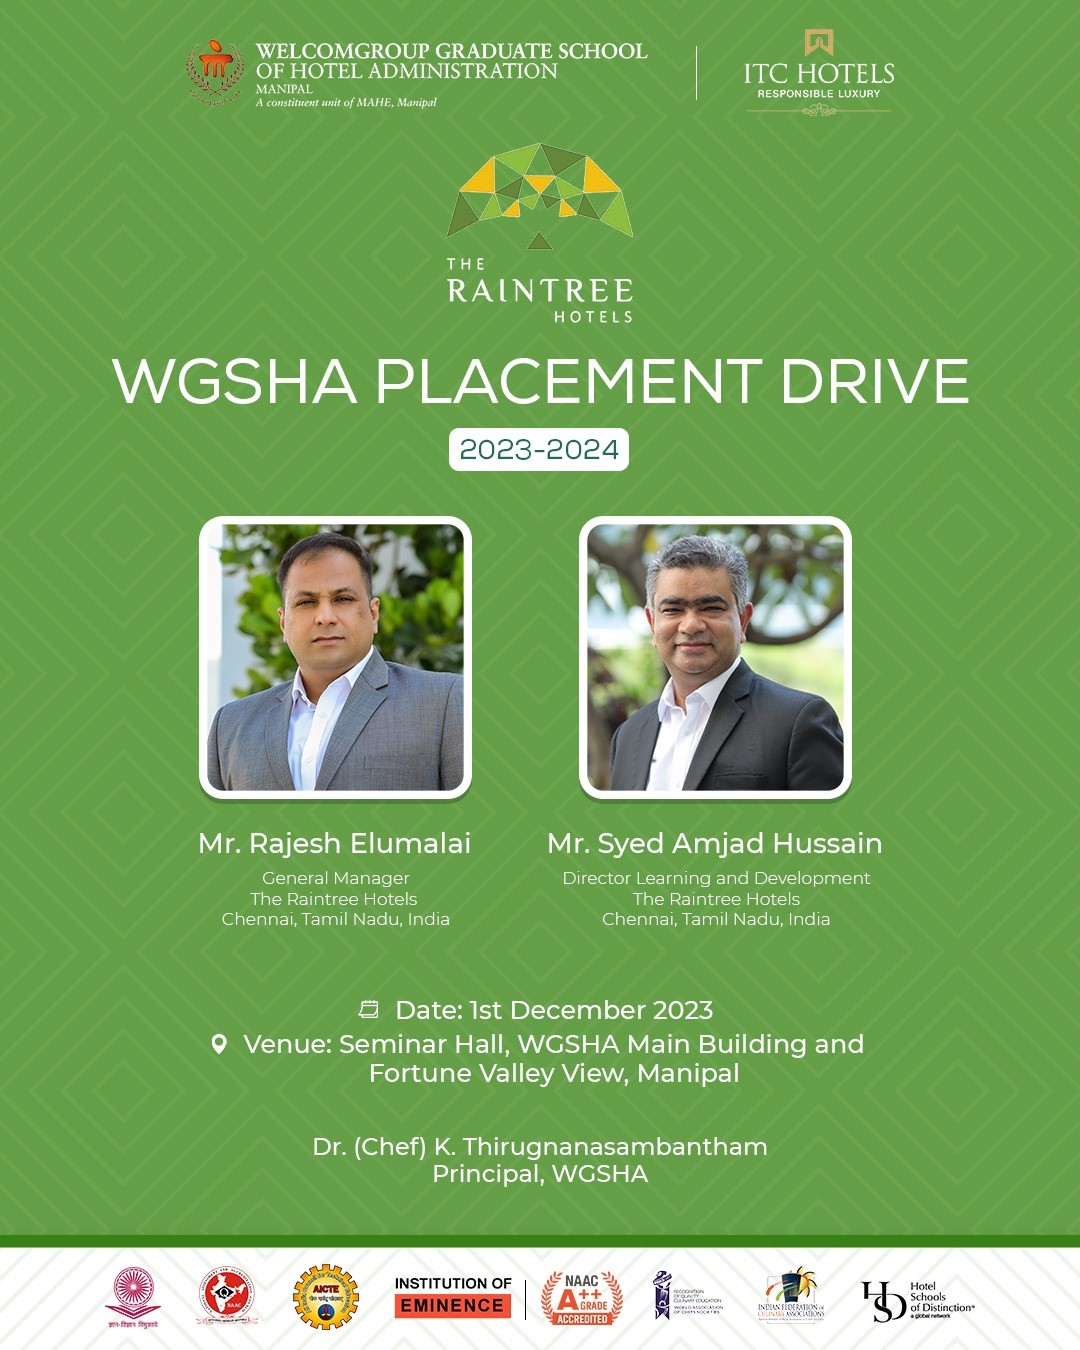 The Raintree Hotels at WGSHA Placement Drive 2023